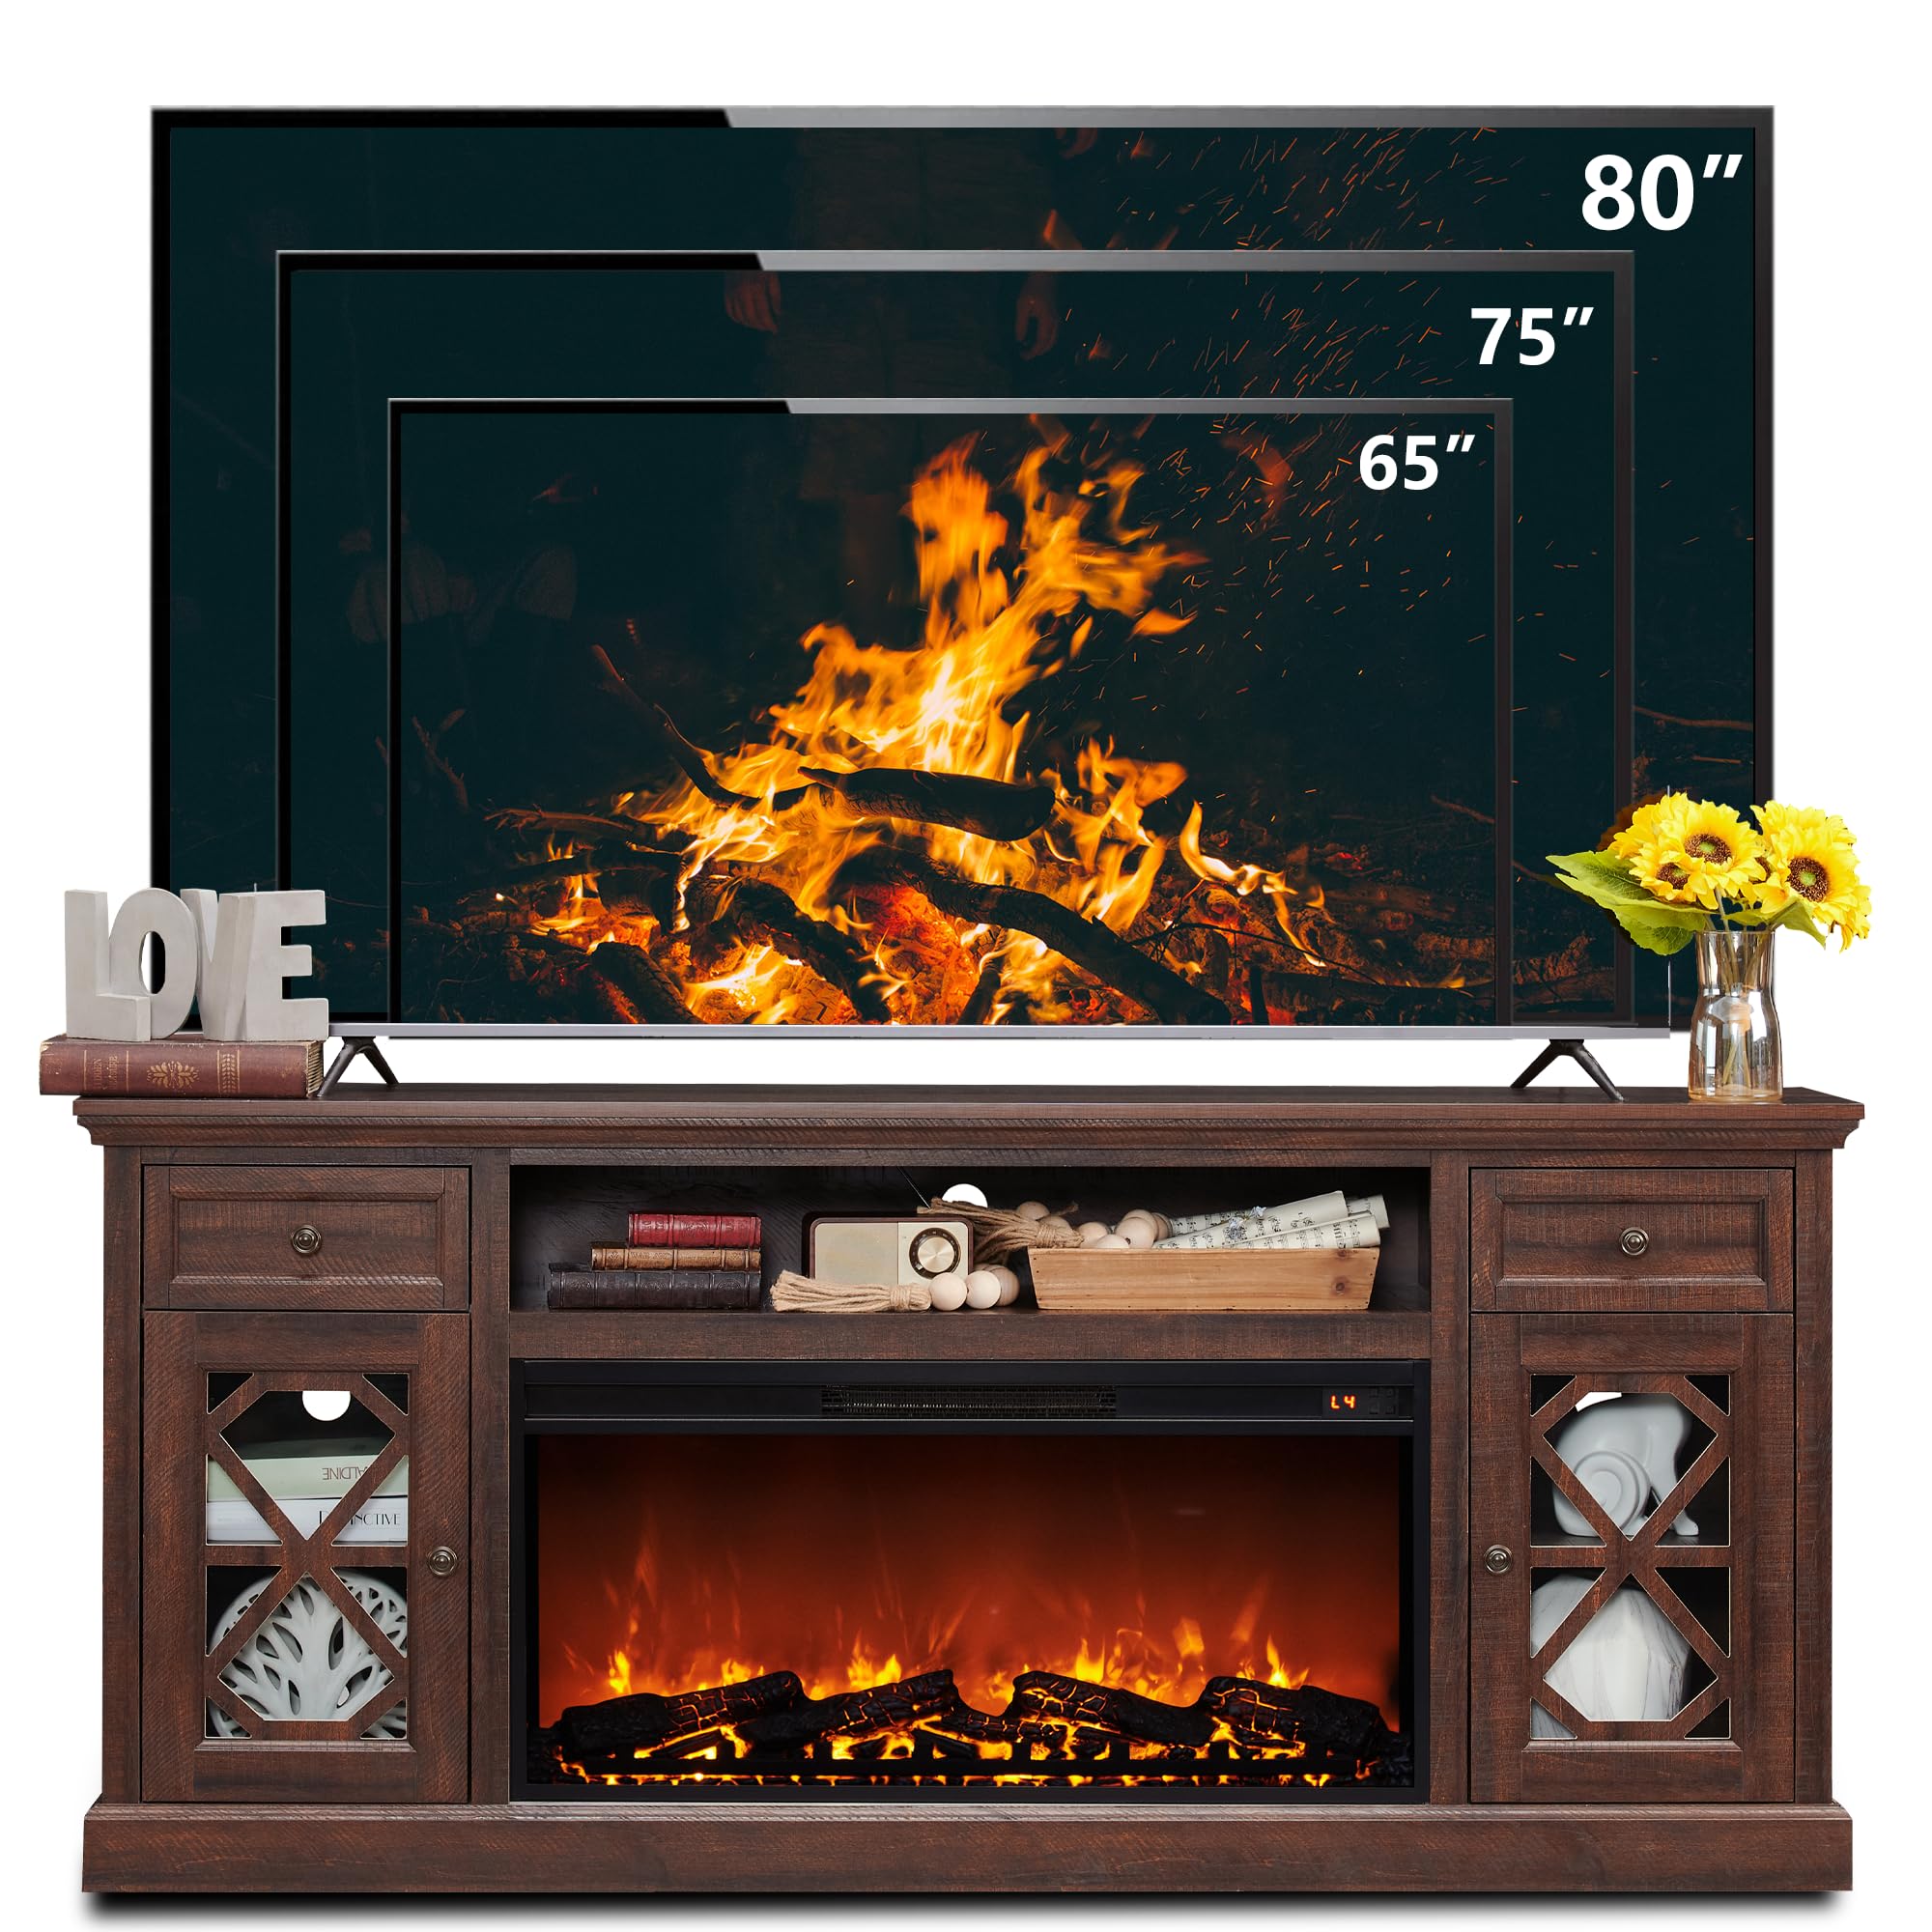 SinCiDo Farmhouse Fireplace TV Stand with 36" Electric Fireplace for 80 Inch TVs, 31" Tall Entertainment Center w/Drawer & Diamond Panel Door, Highboy Media Console for Living Room, 70inch, Brown